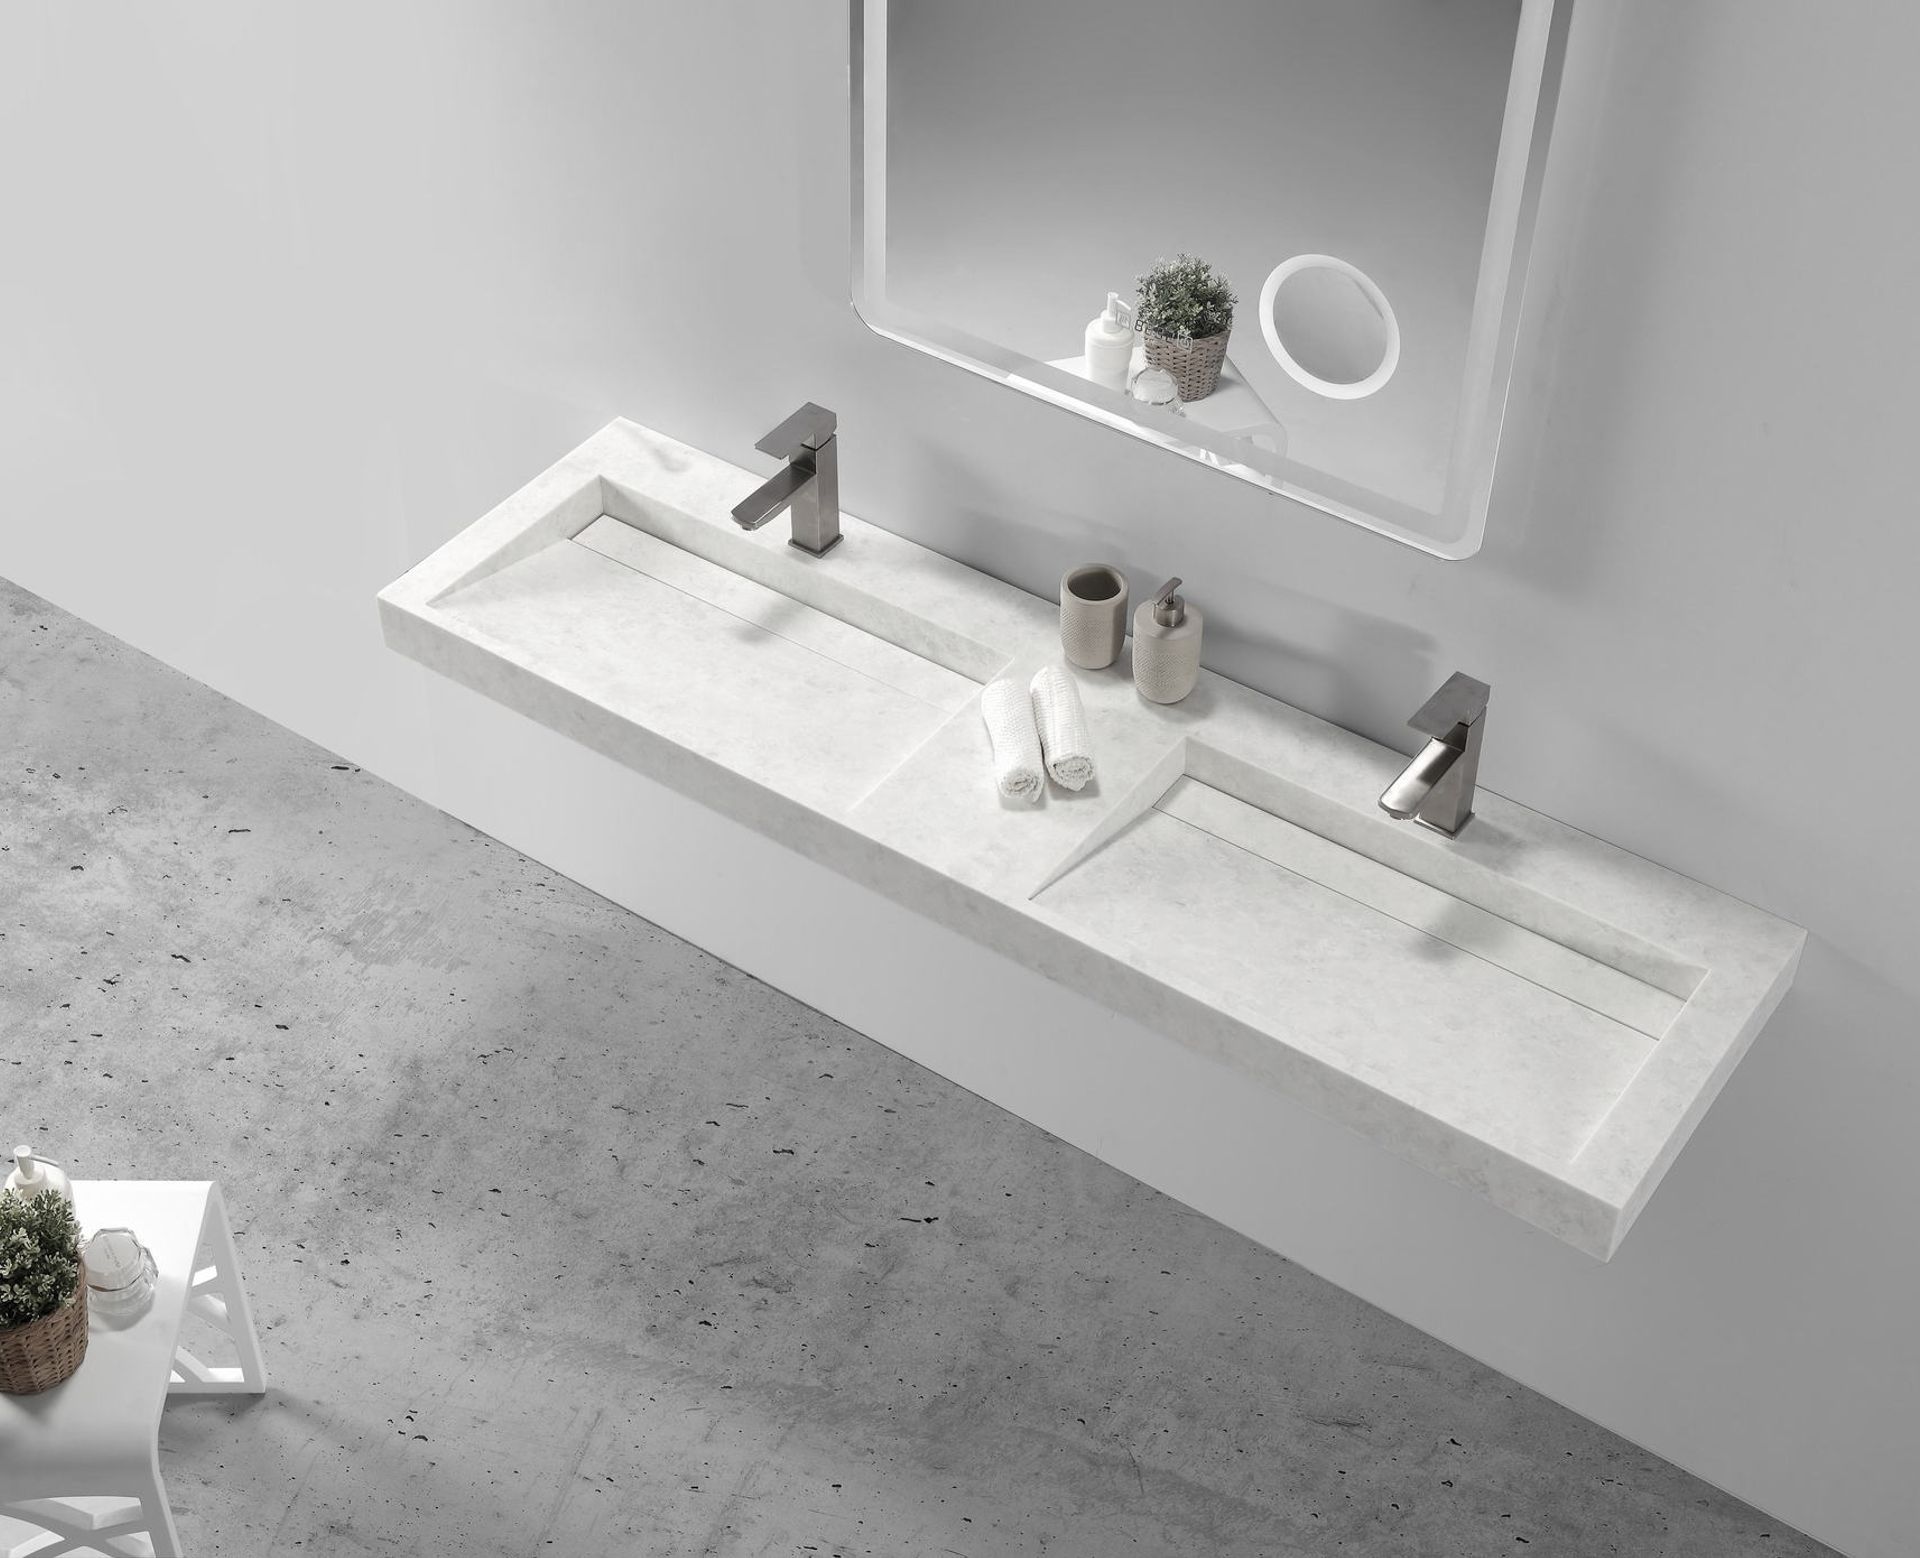 The Perfect Fit: Concrete Corner Basins for Small Bathrooms